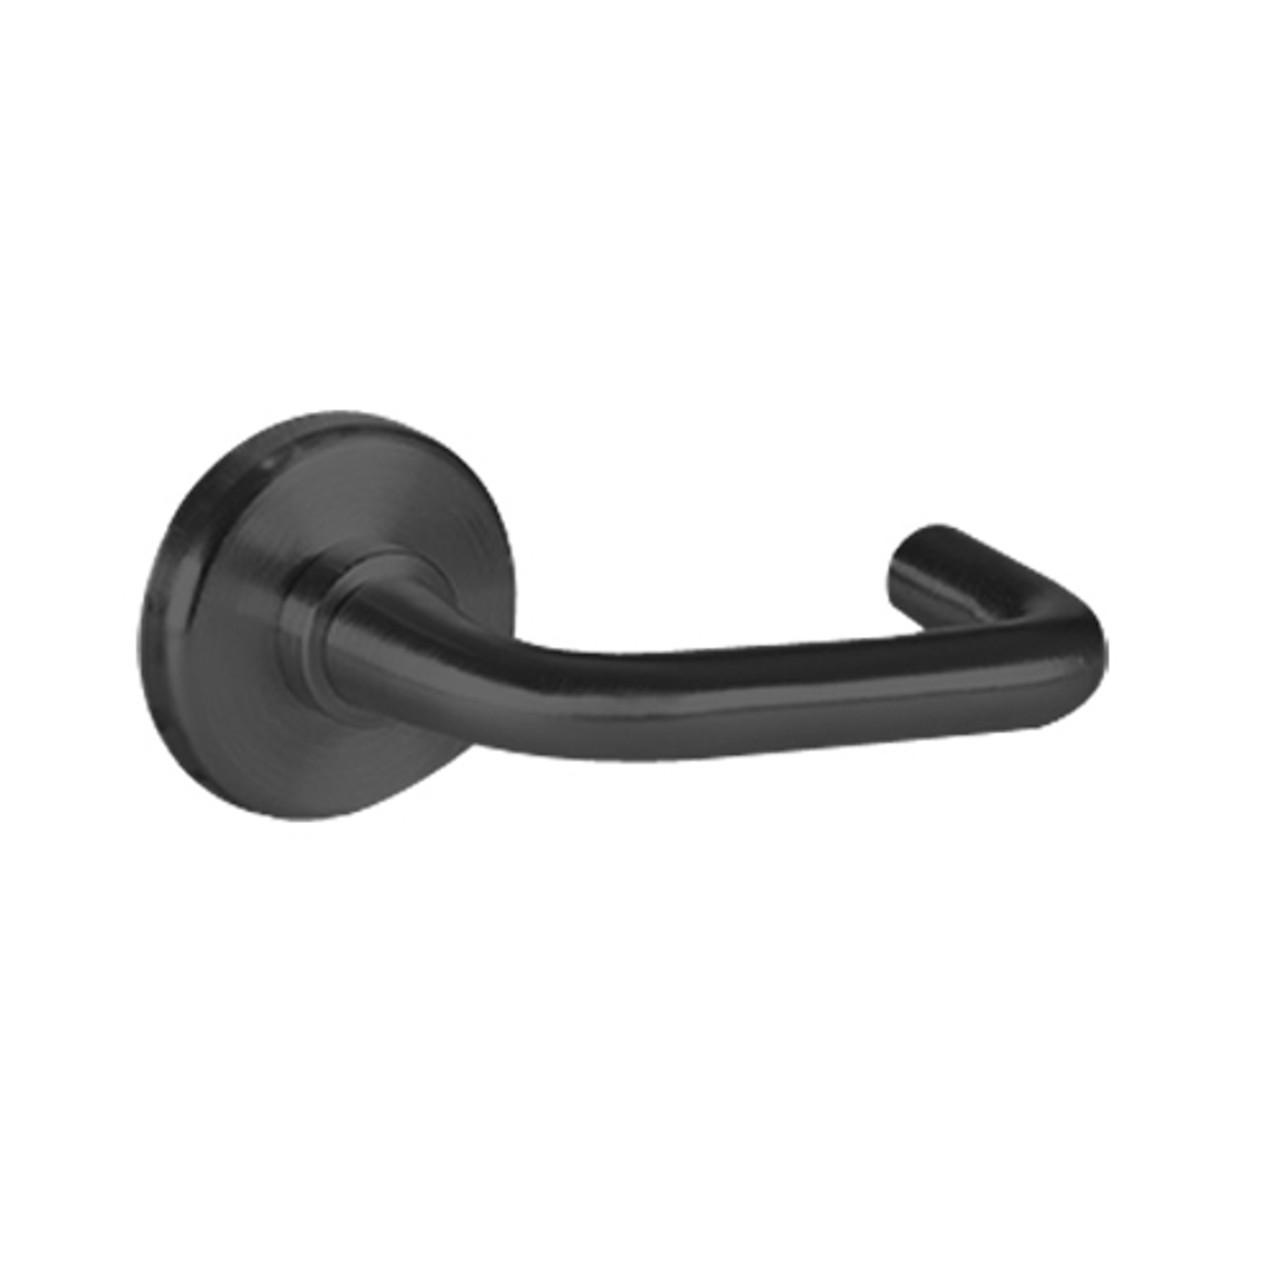 45H7G3R622 Best 40H Series Communicating with Deadbolt Heavy Duty Mortise Lever Lock with Solid Tube Return Style in Black